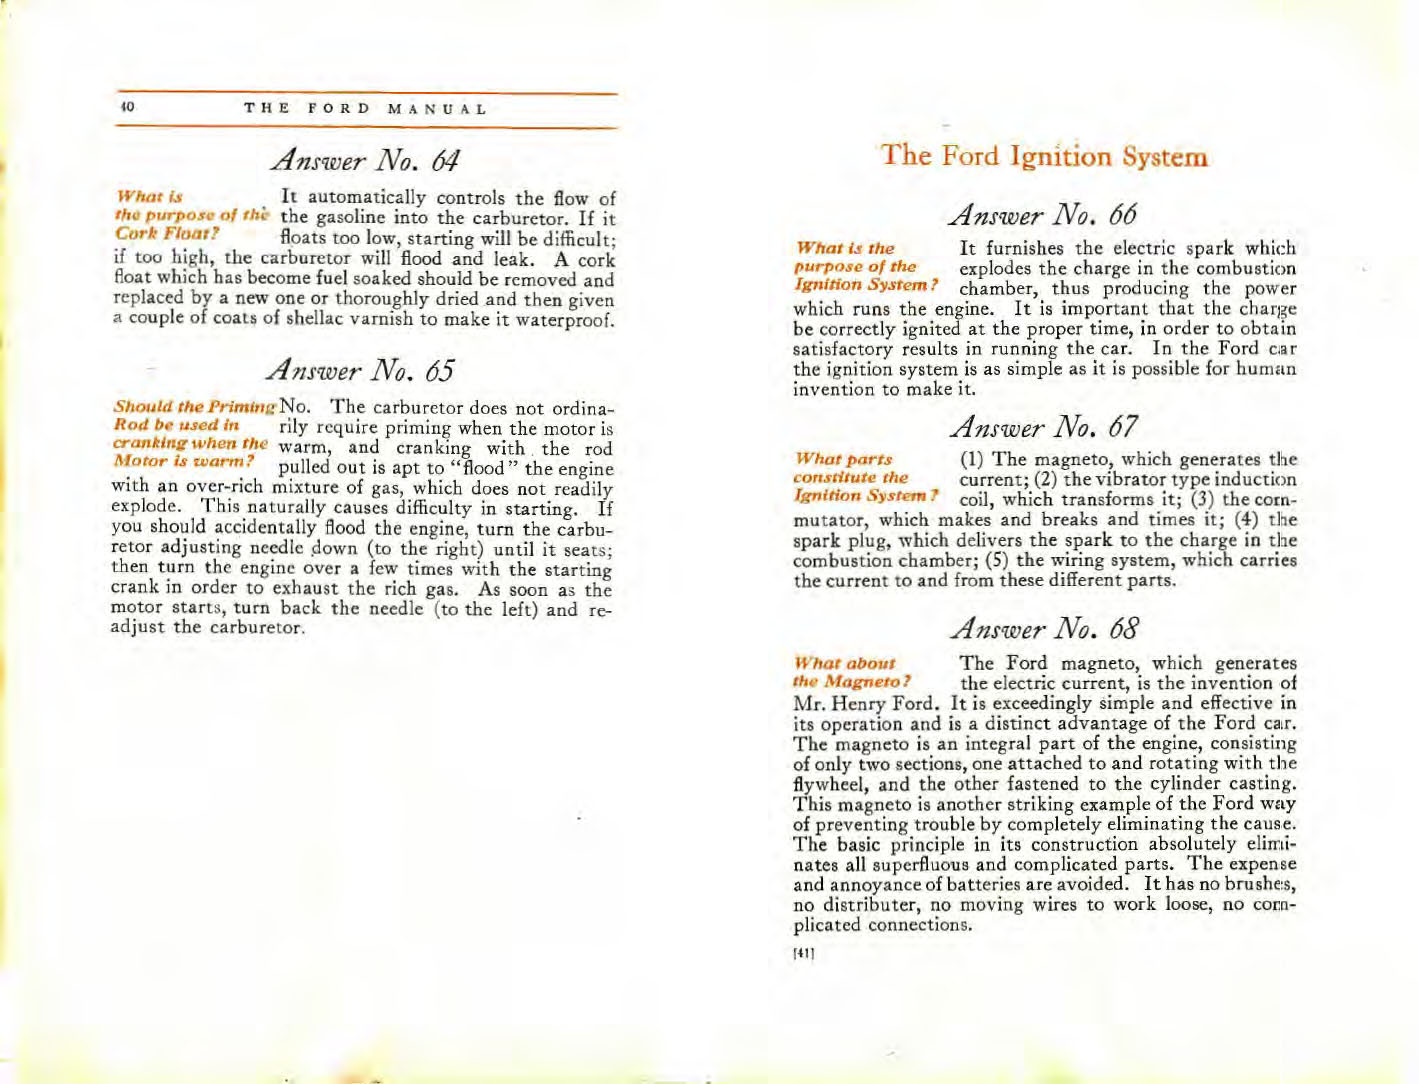 1915_Ford_Owners_Manual-40-41